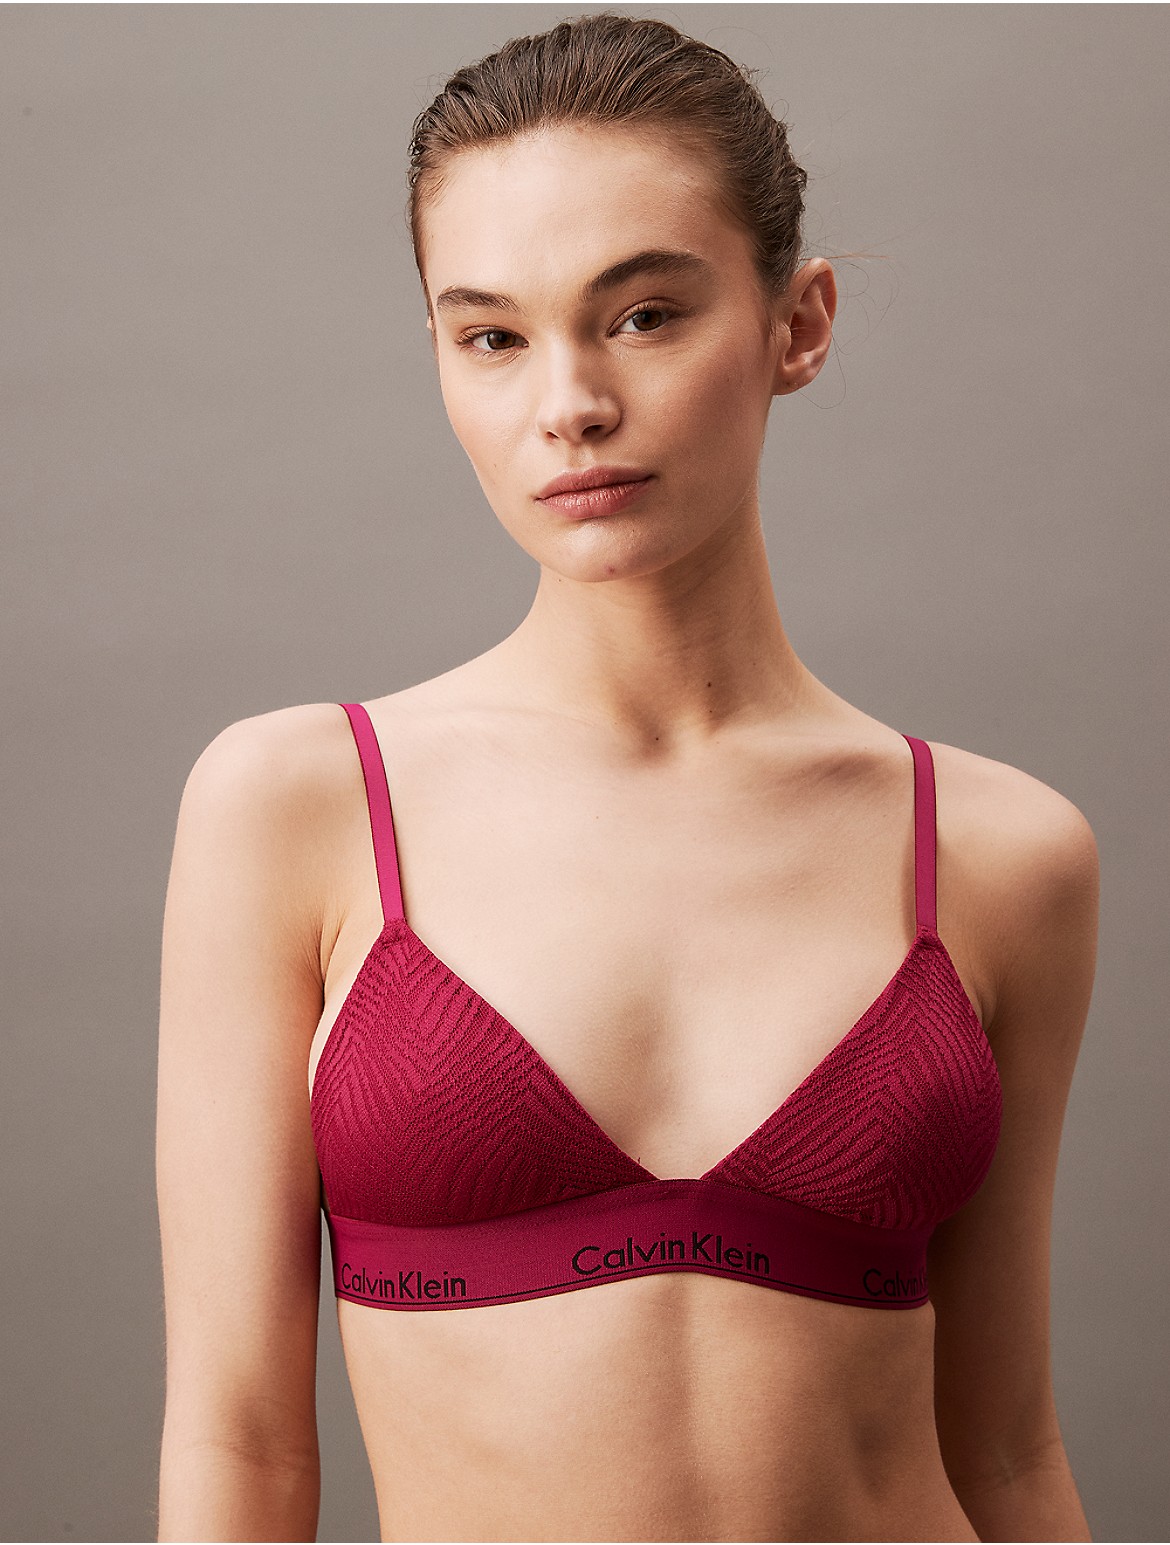 Calvin Klein Women's Modern Lace Lightly Lined Triangle Bralette - Red - XS